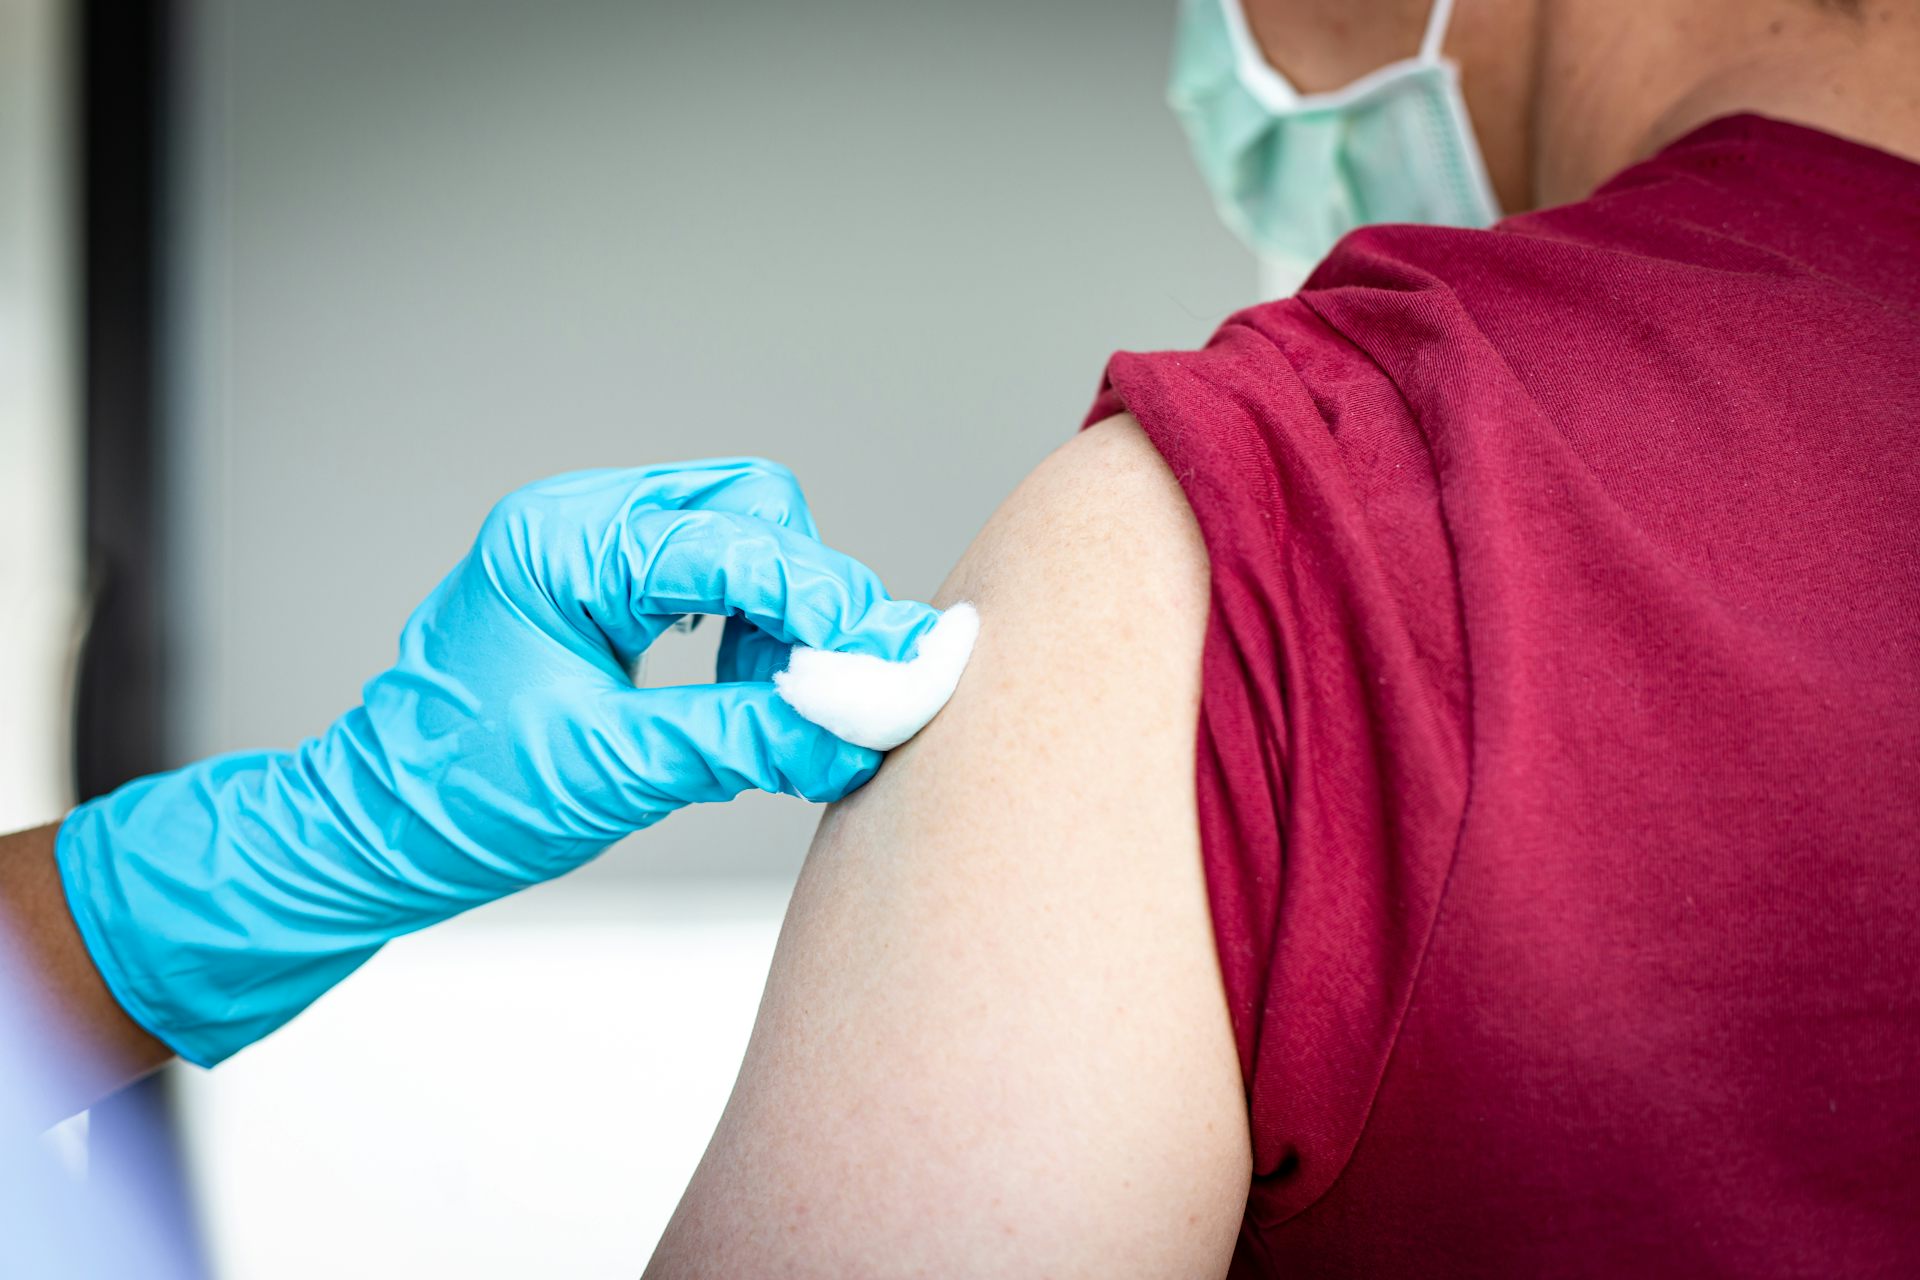 Why can you still get influenza if you’ve had a flu shot?